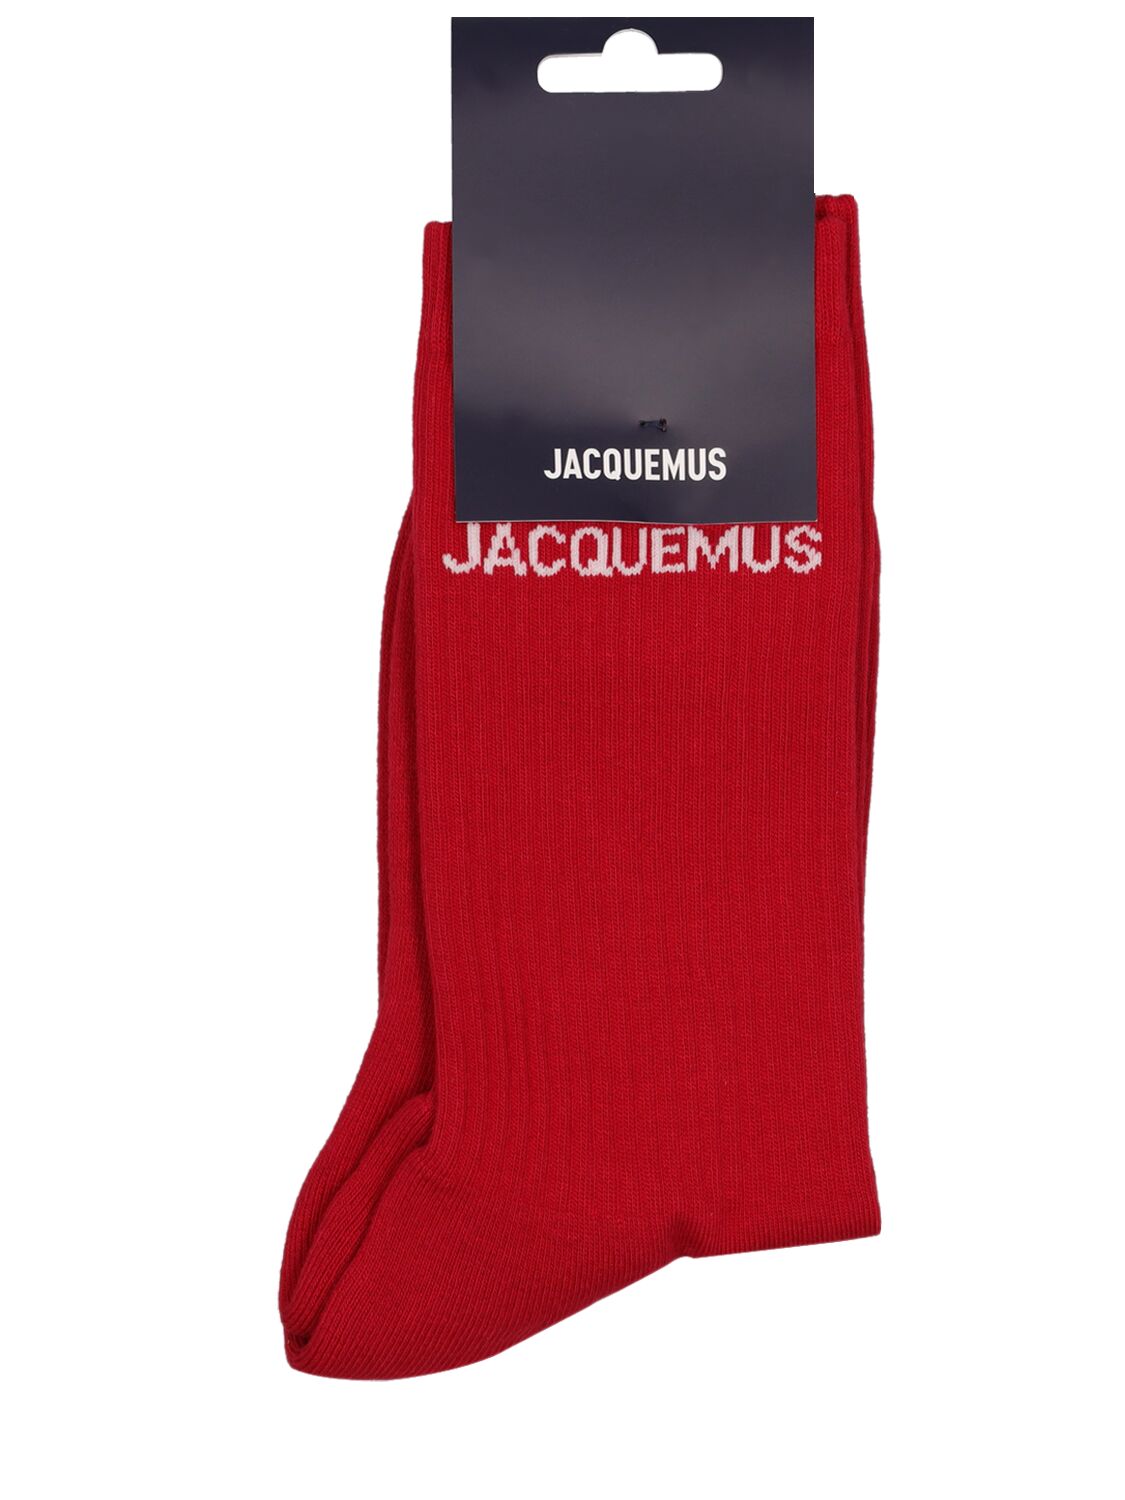 Jacquemus Les Chaussettes Cotton Blend Socks In Red